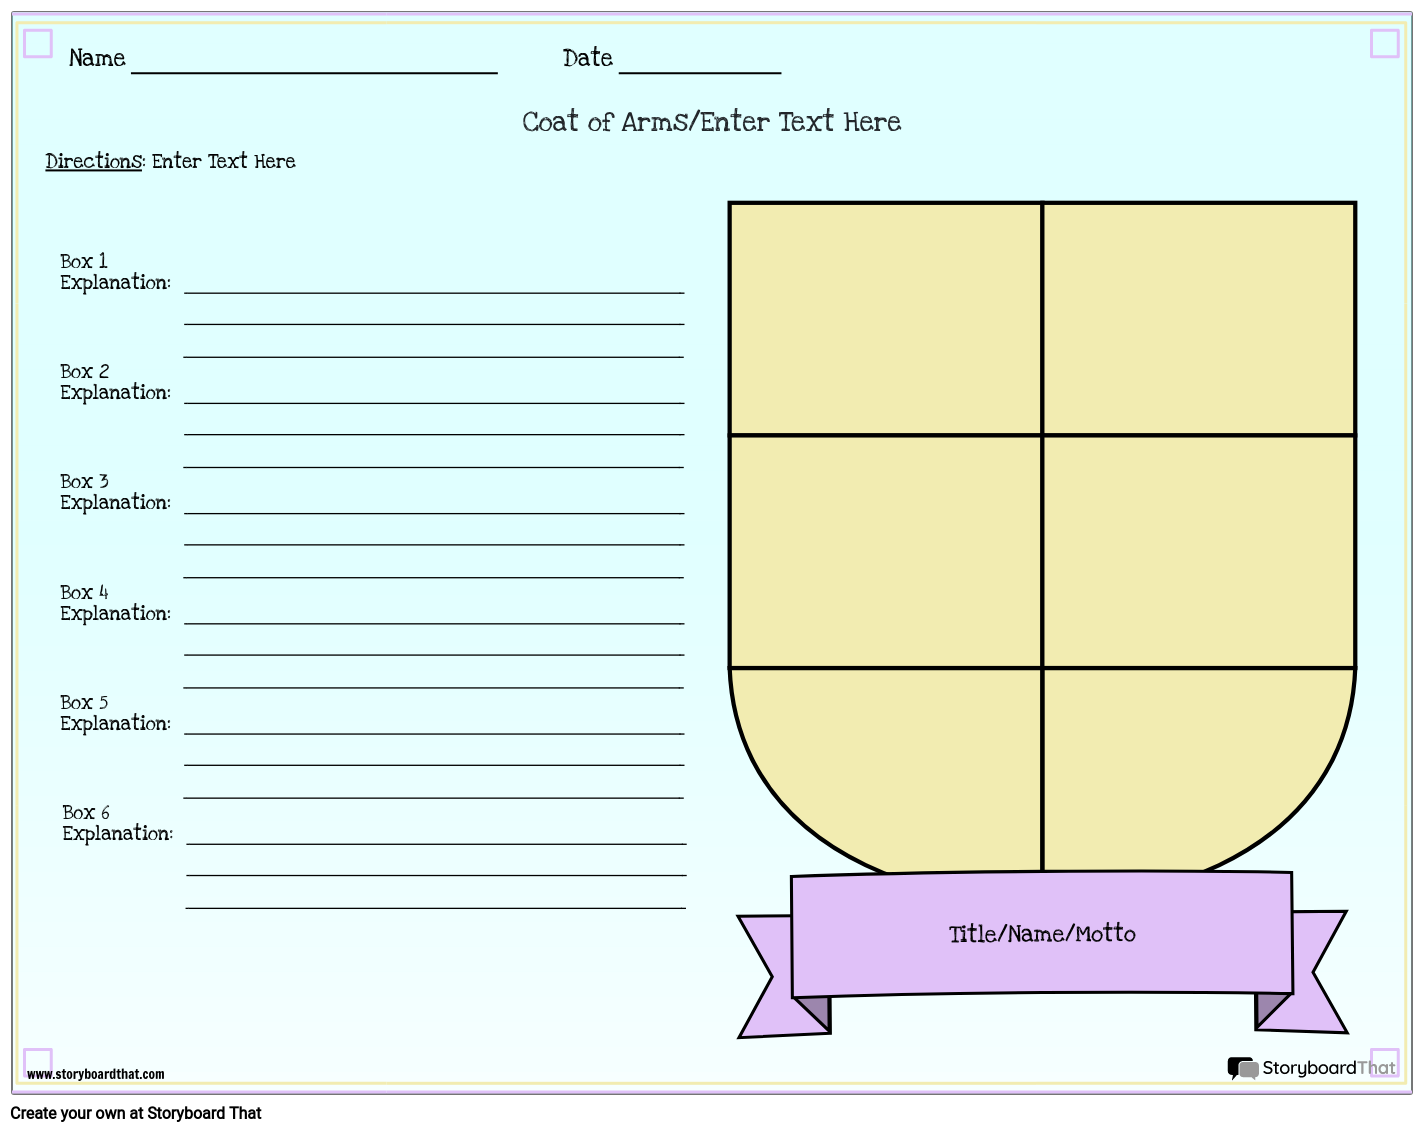 Fully Customizable Coat of Arms Activity for Students